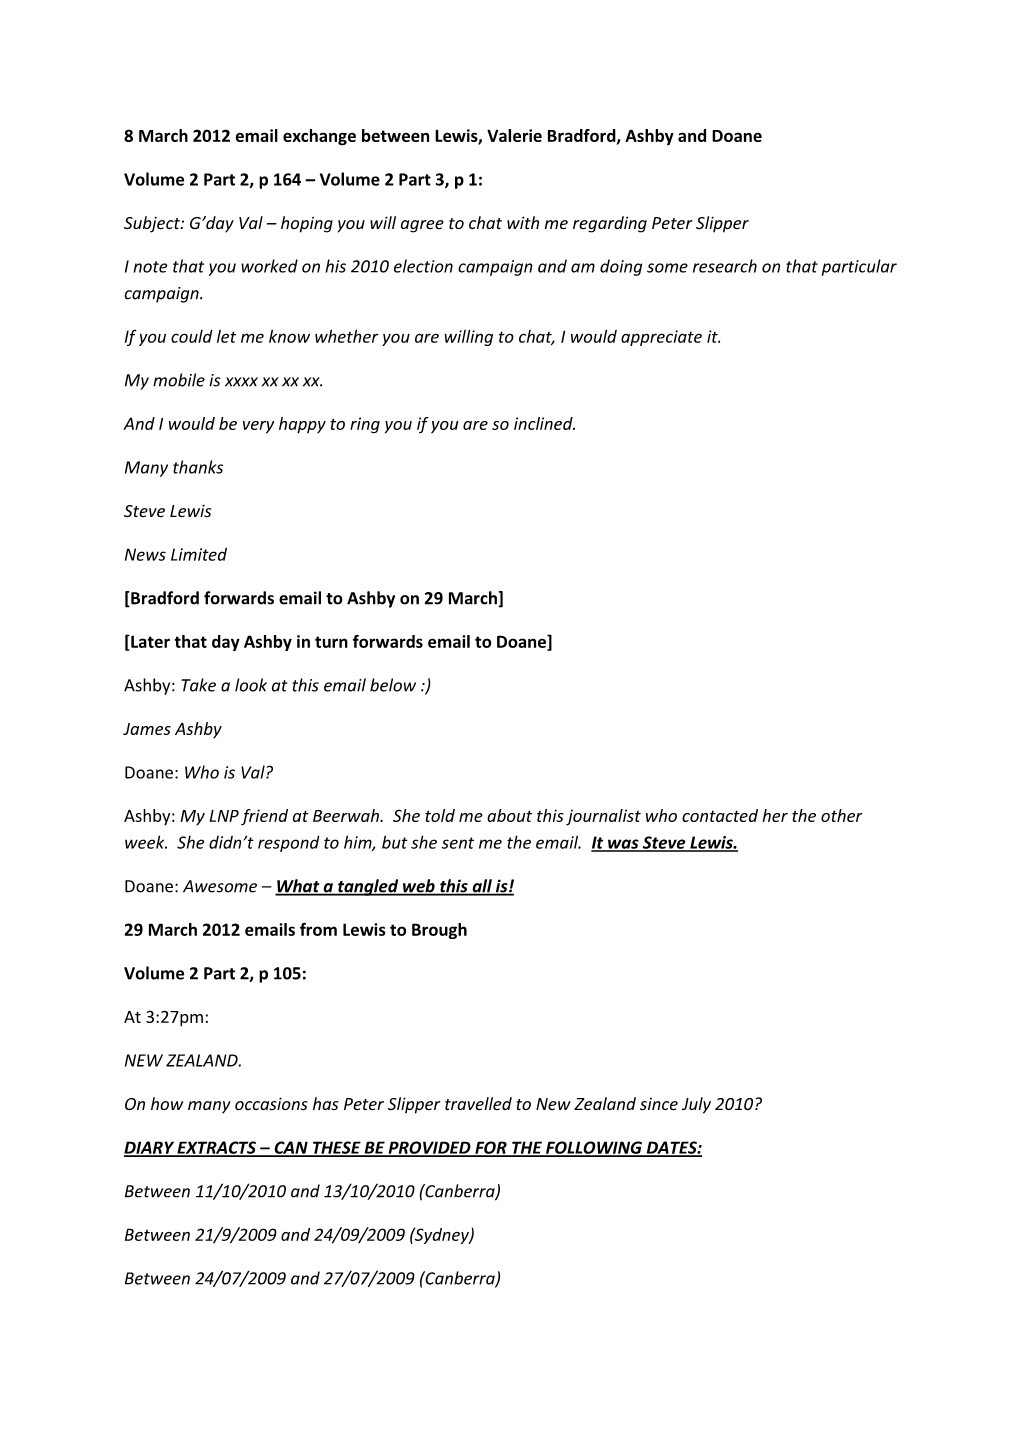 8 March 2012 Email Exchange Between Lewis, Valerie Bradford, Ashby and Doane